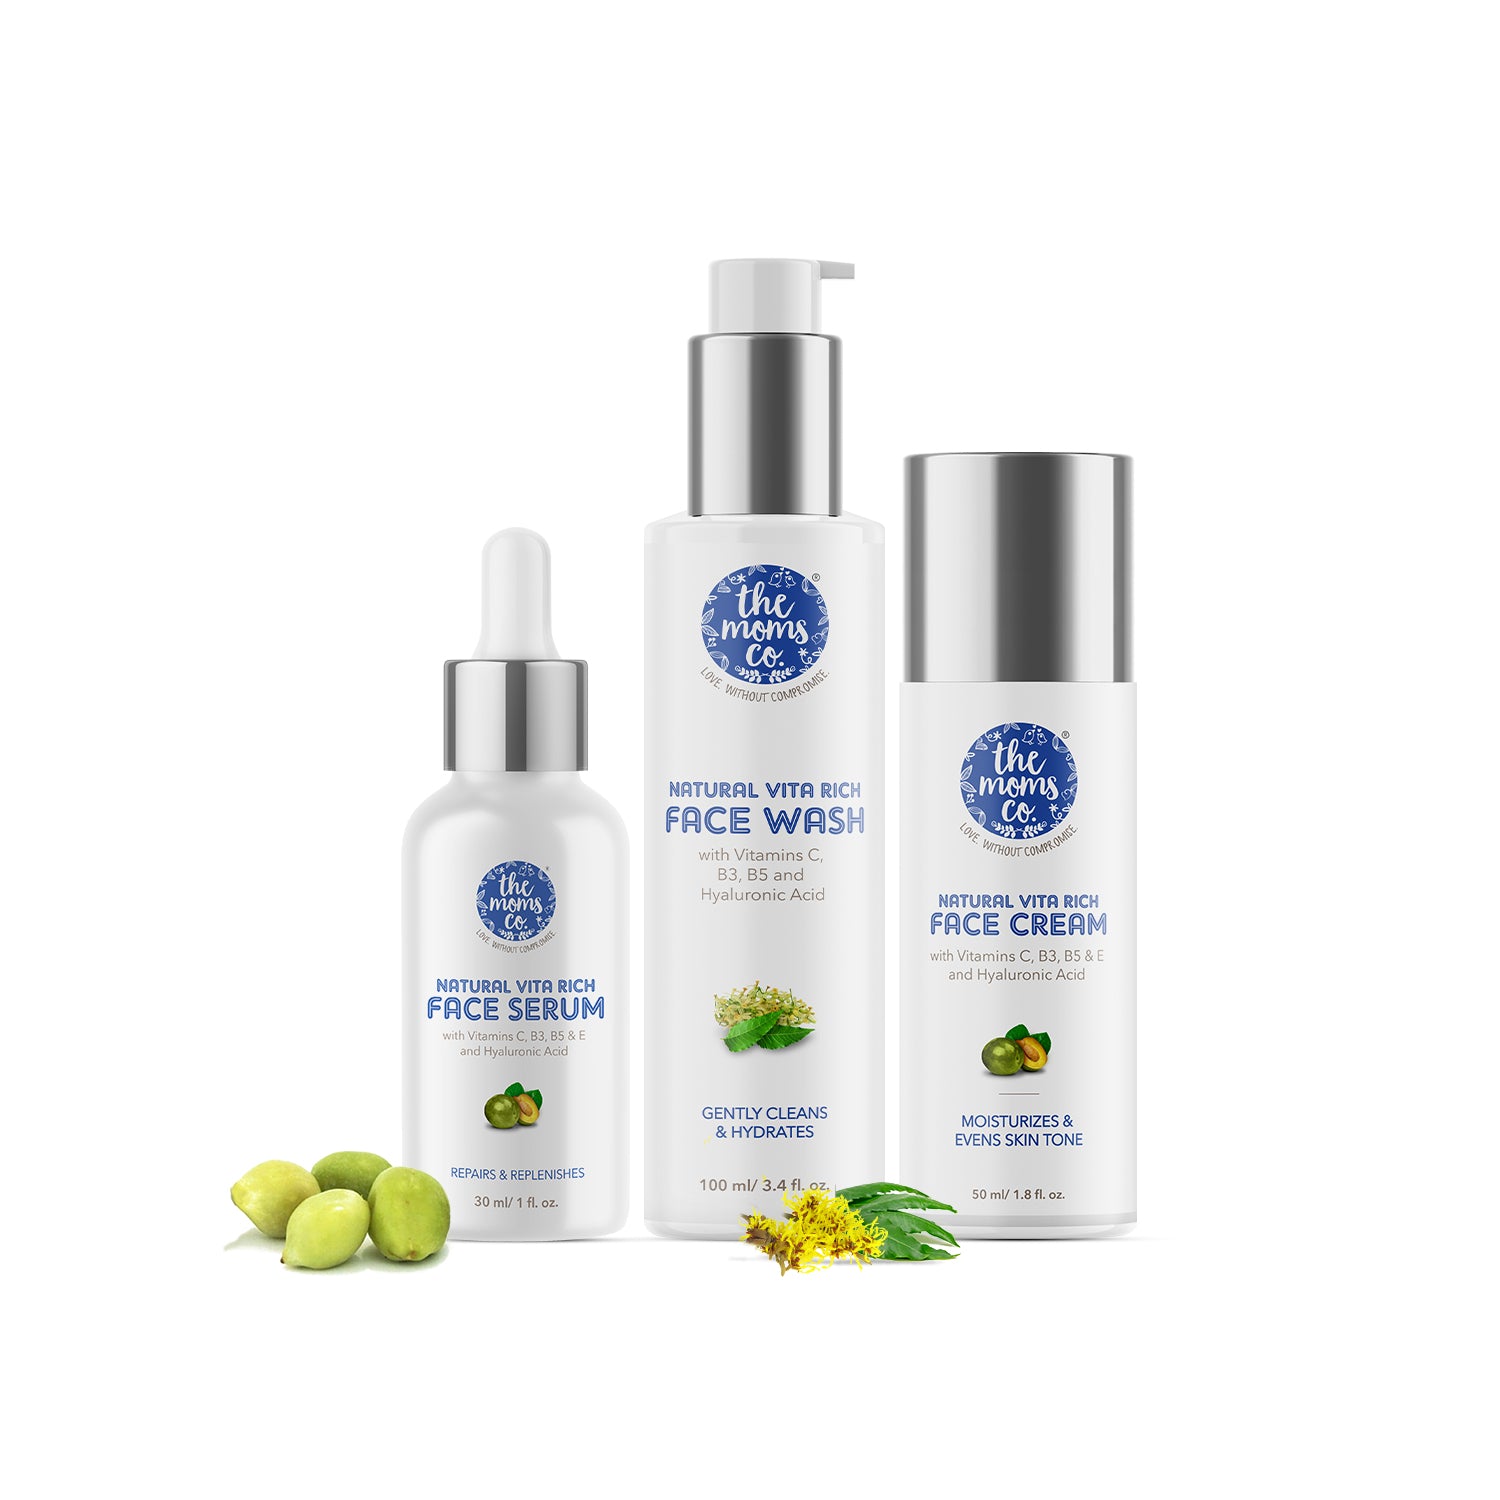 The Moms Co. Natural Vita Rich Complete Night Repair Bundle with Face Wash, Face Cream & Face Serum